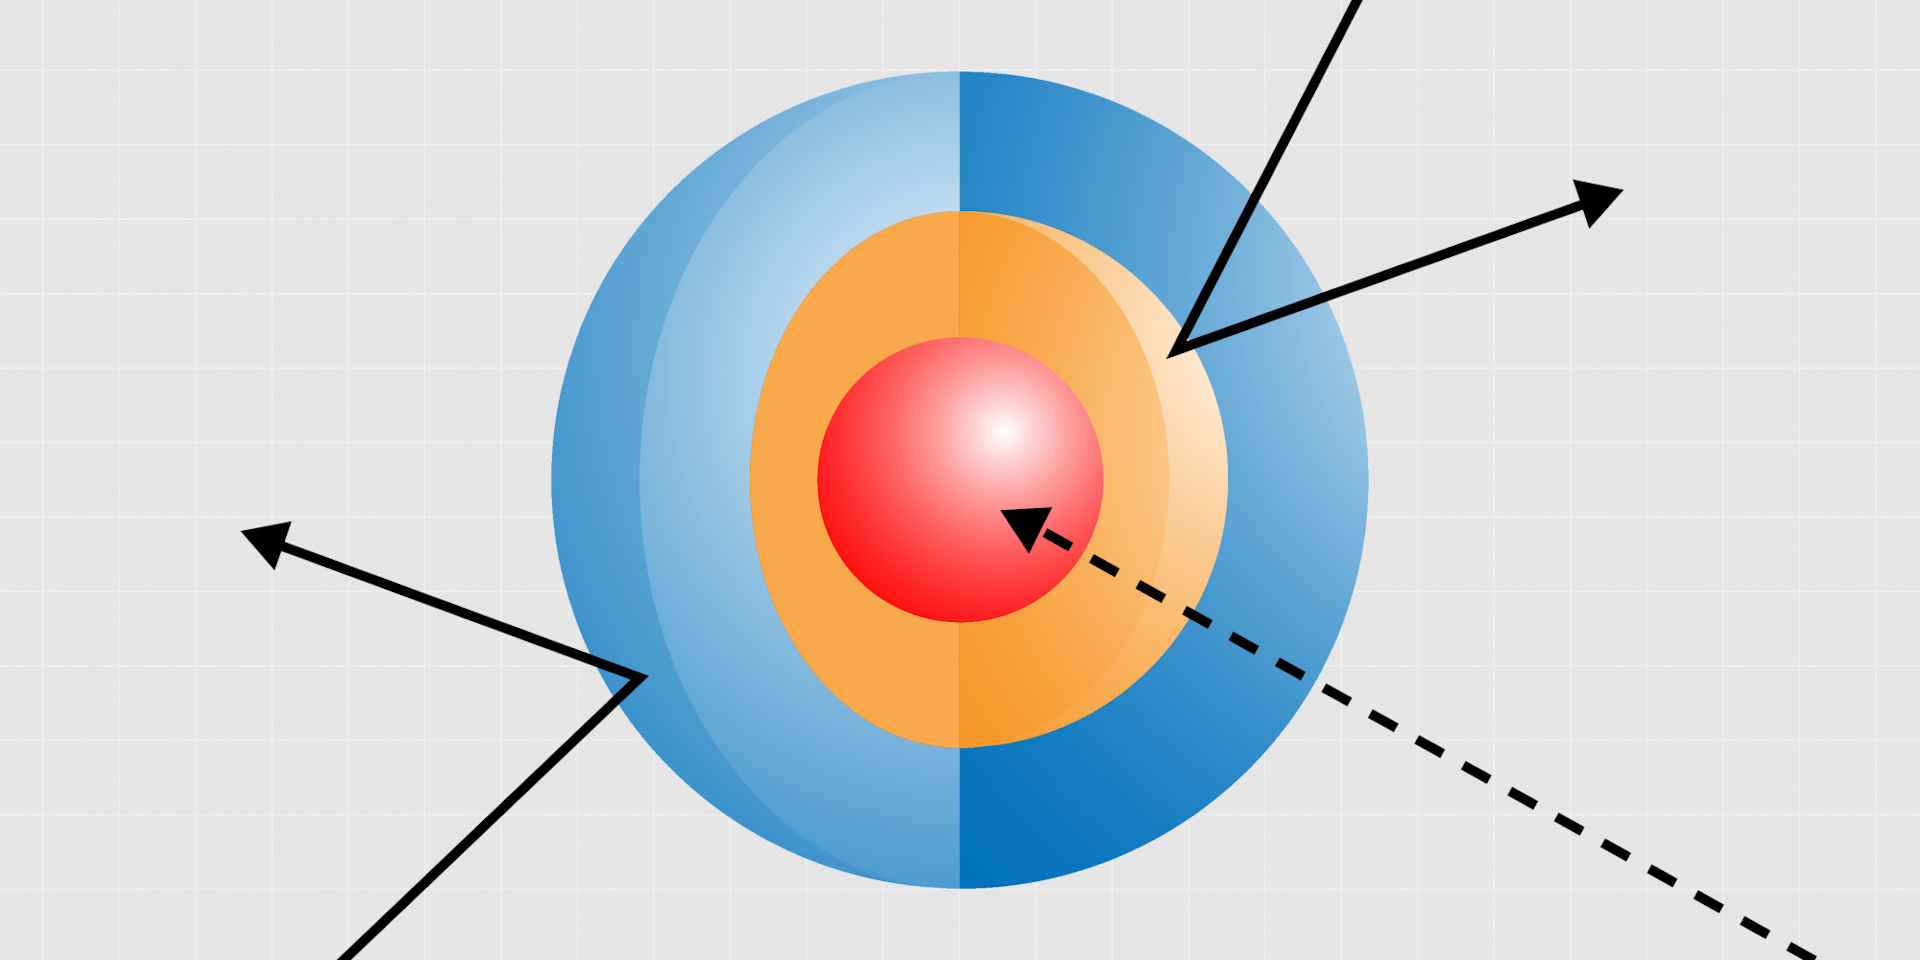 Three intersecting spheres with arrows. 